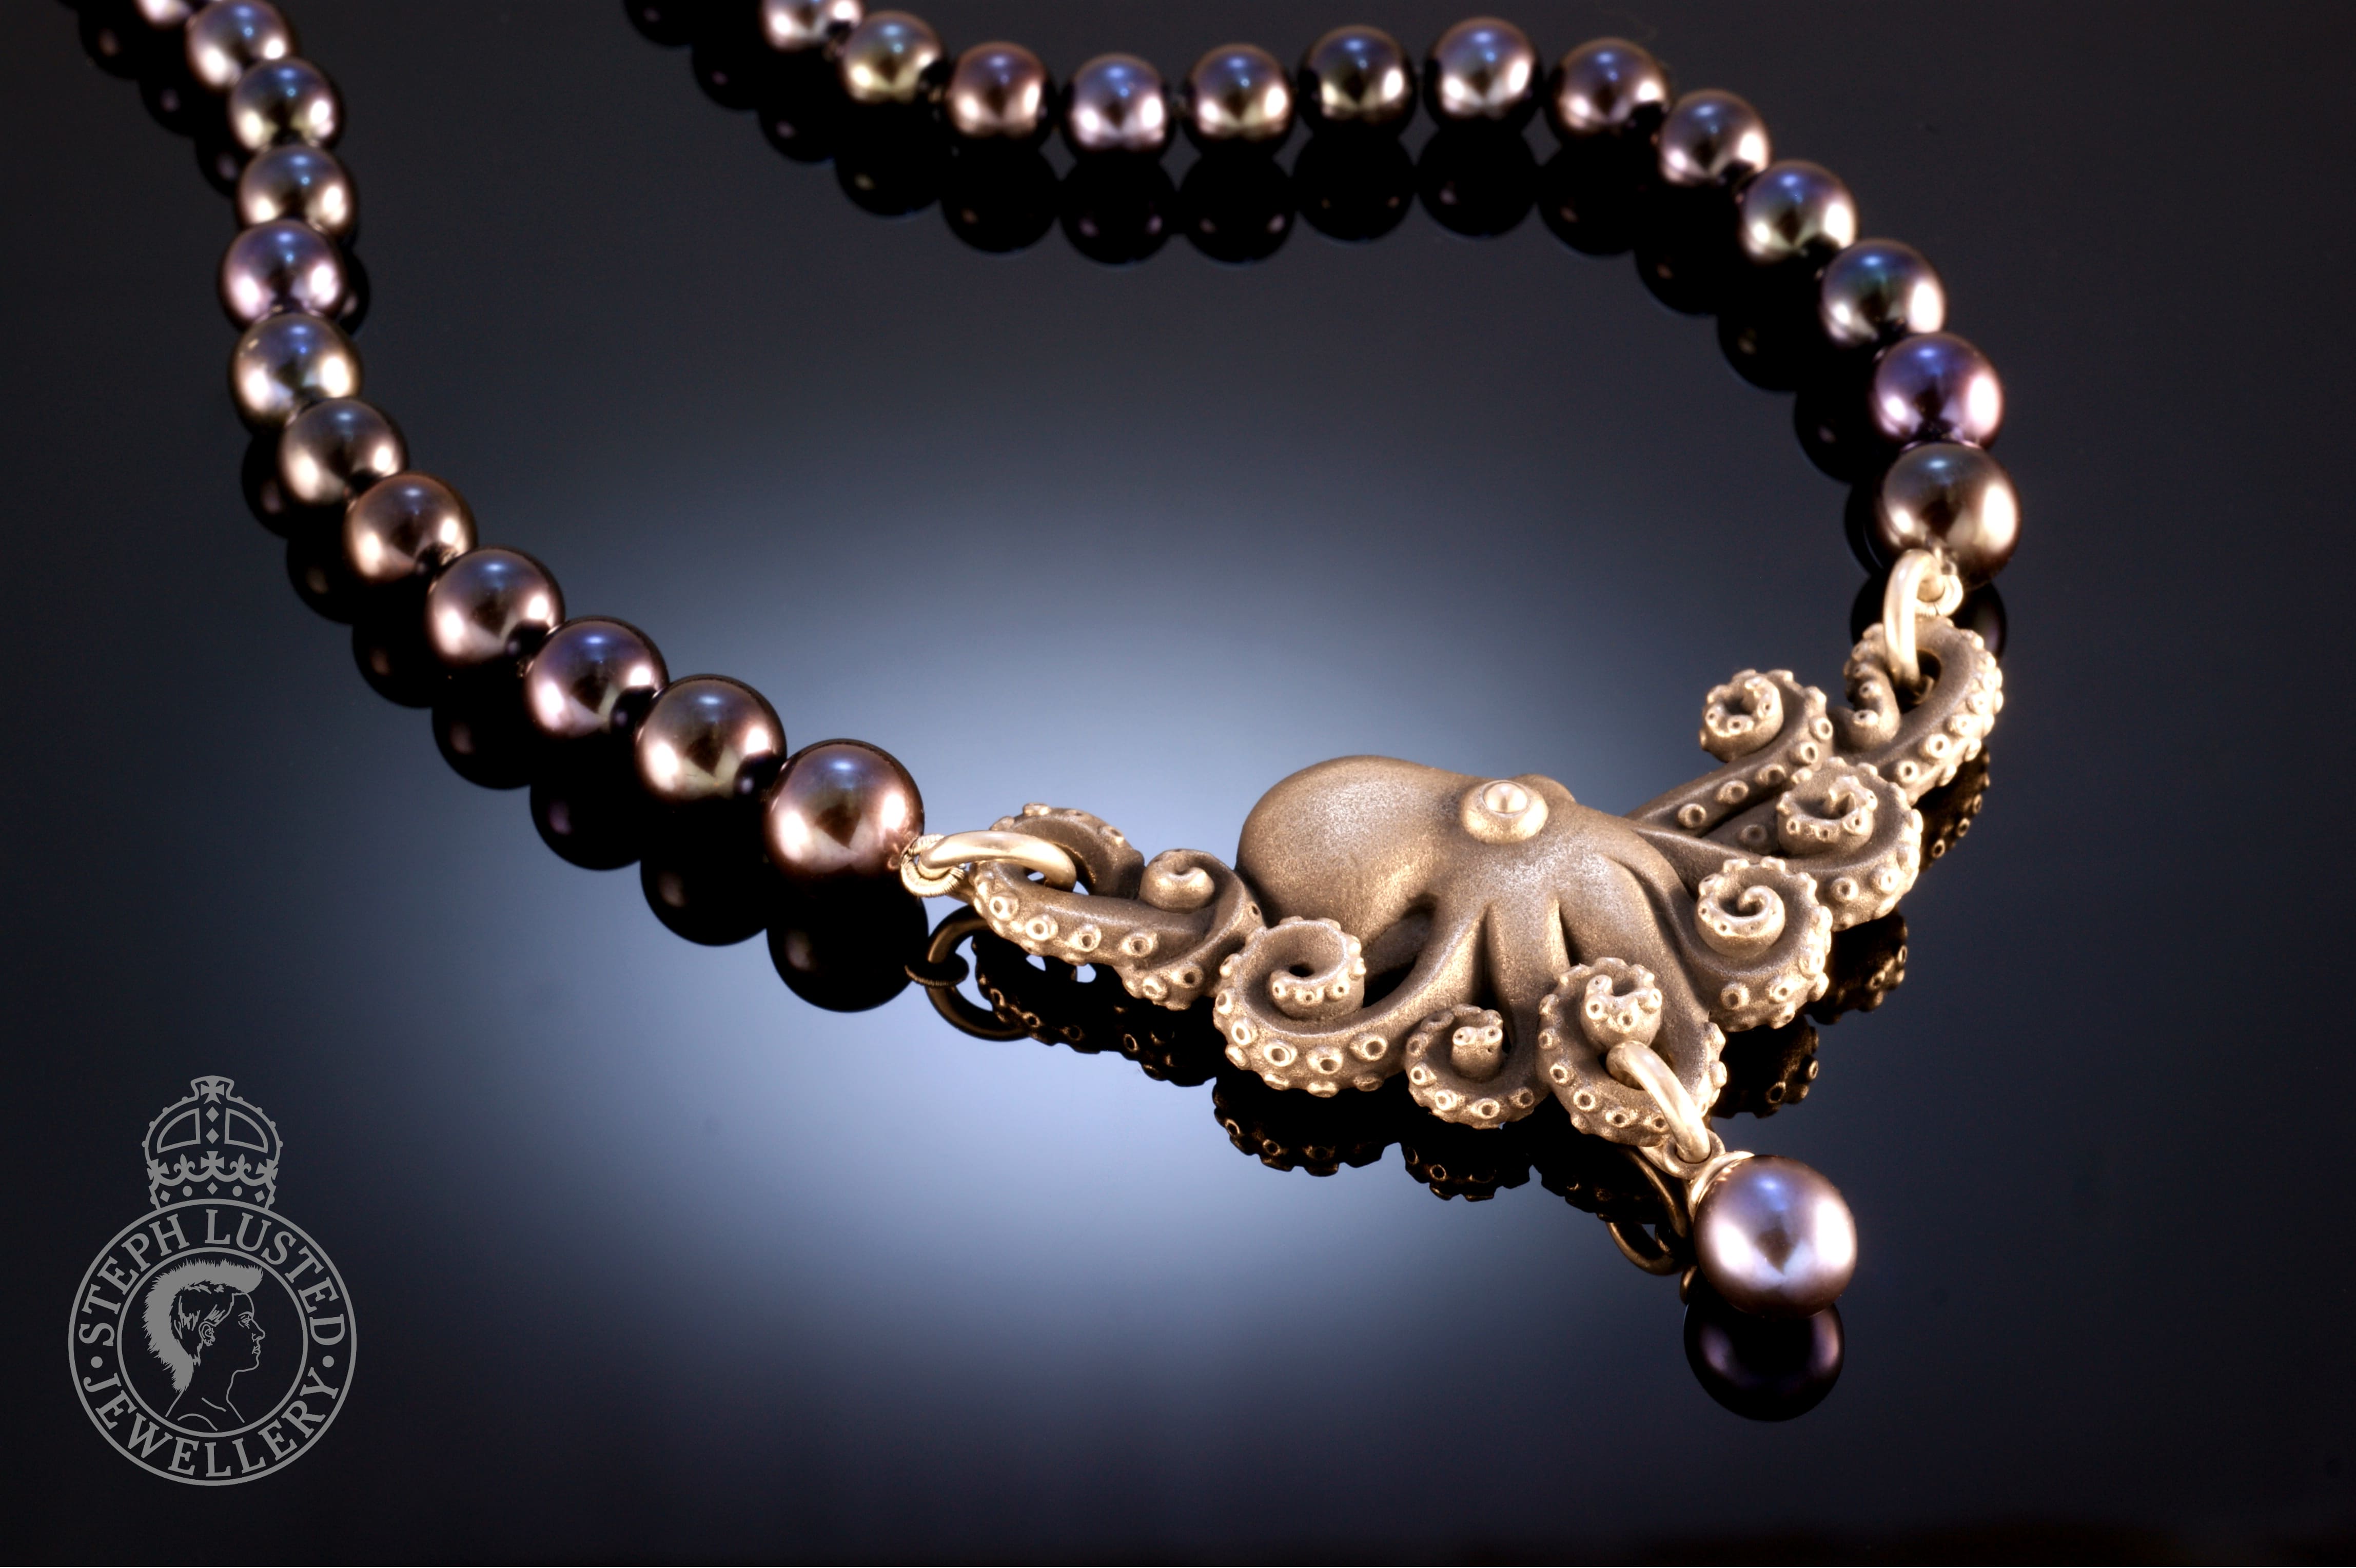 Octopus with Pearls